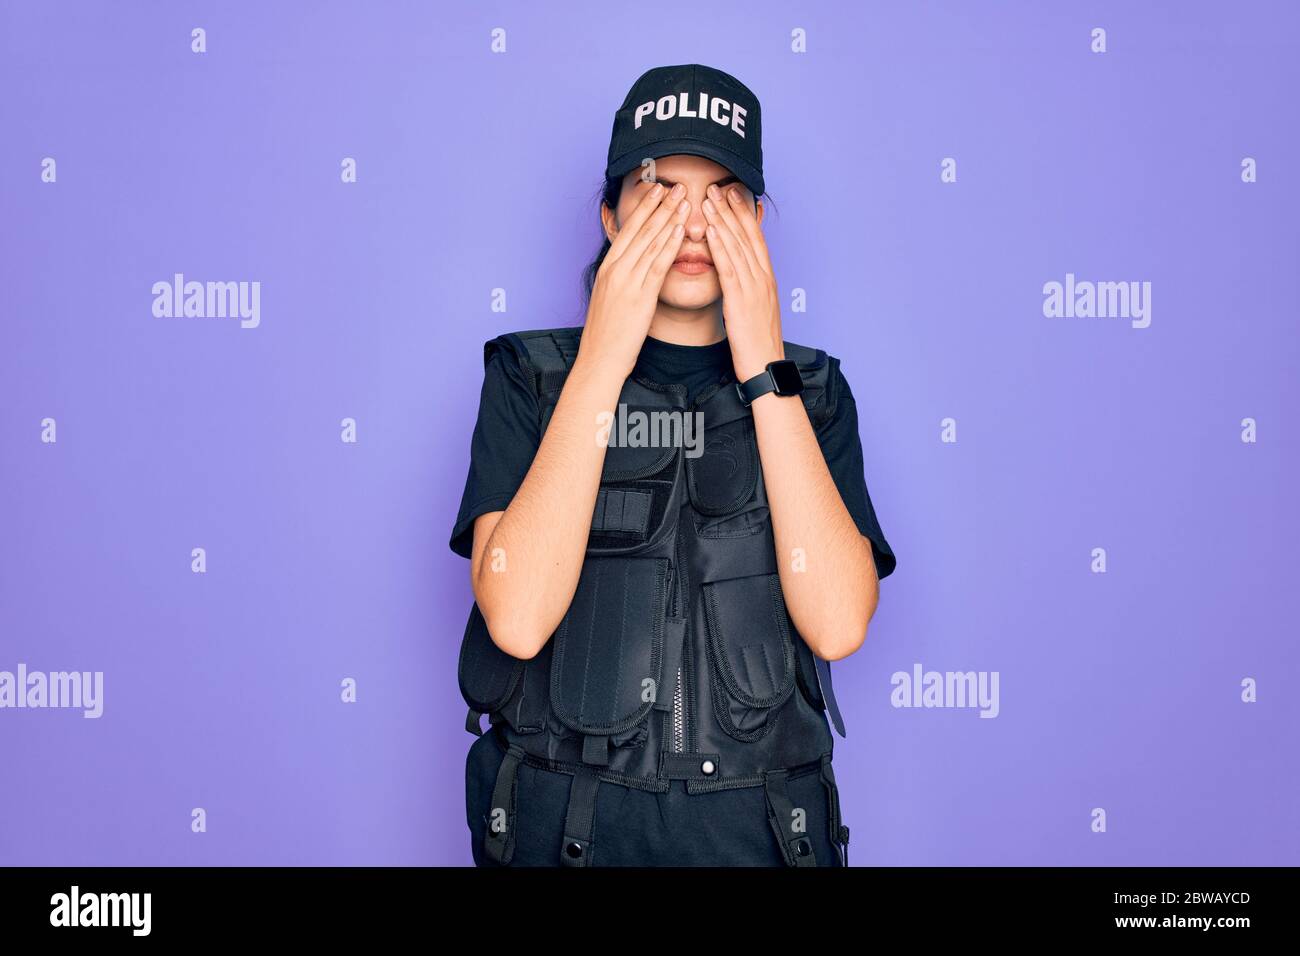 Young police woman wearing security bulletproof vest uniform over purple background rubbing eyes for fatigue and headache, sleepy and tired expression Stock Photo